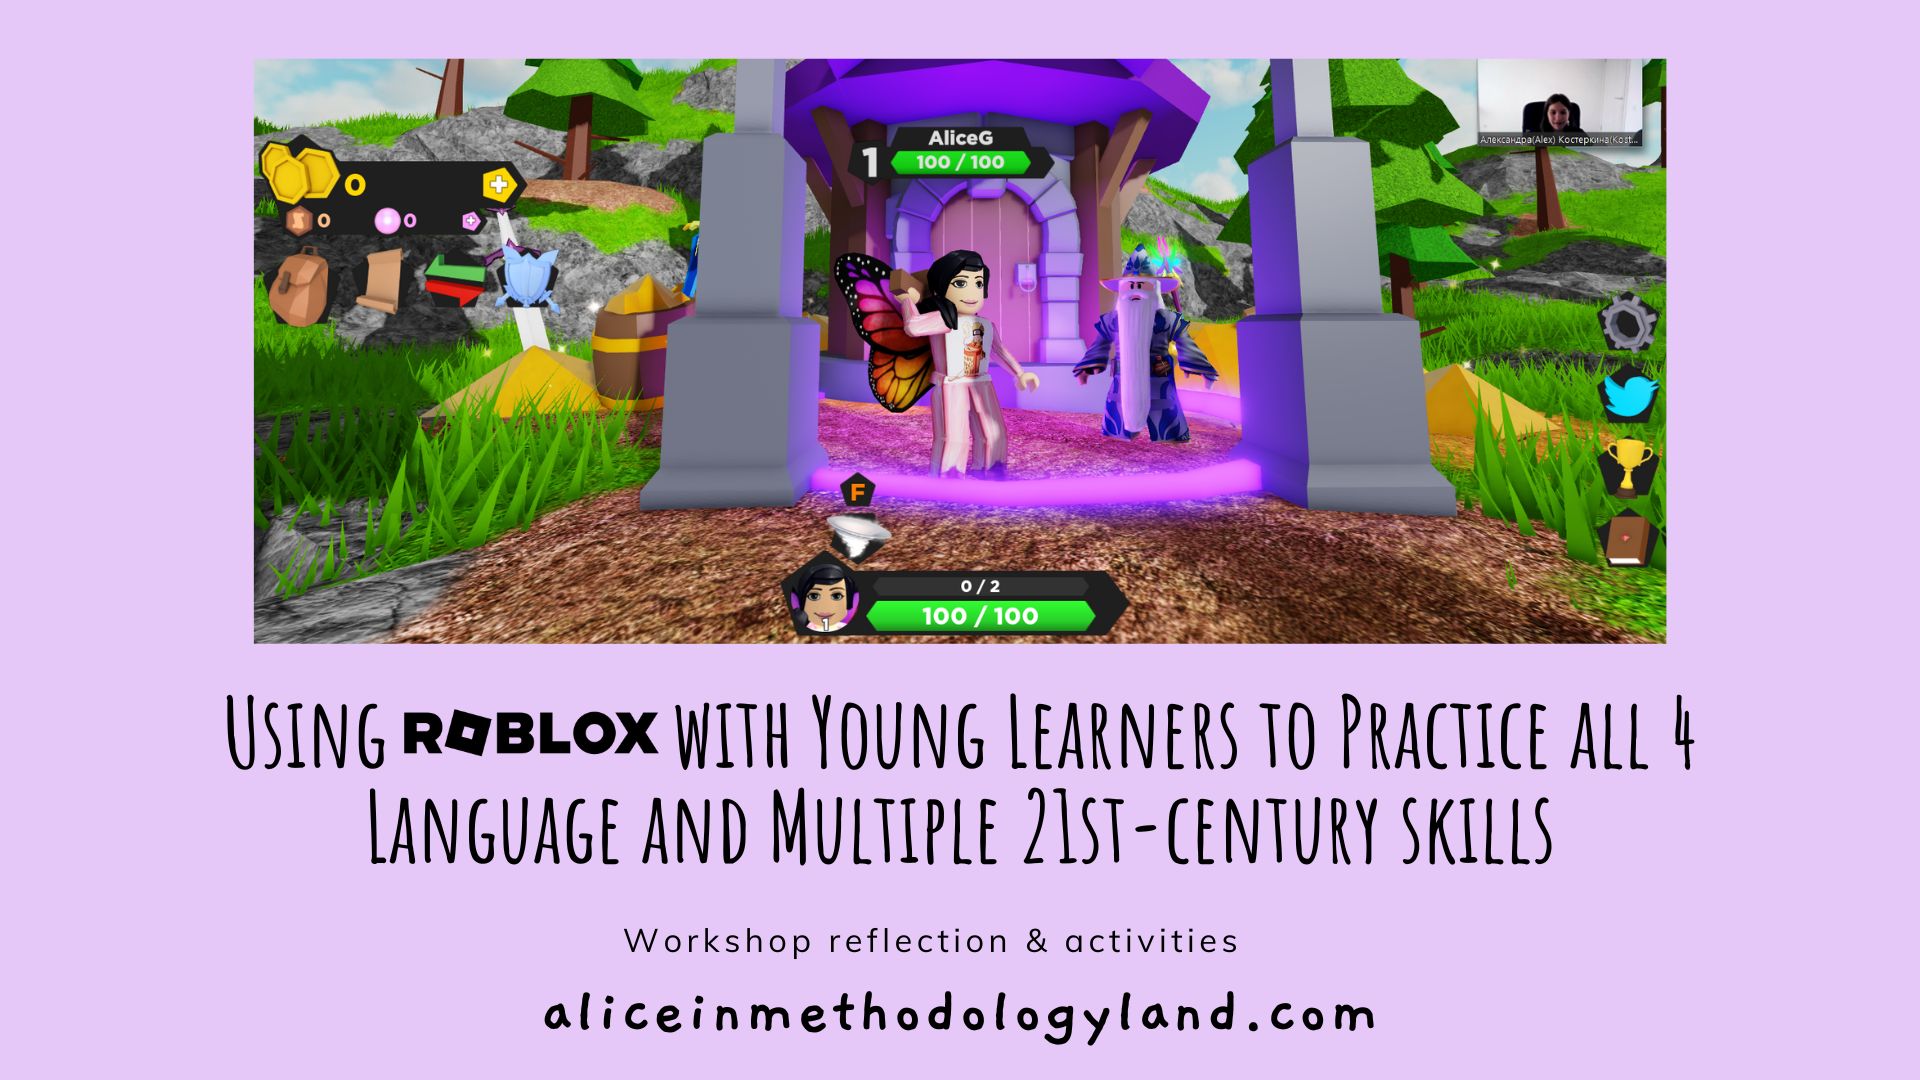 Using Roblox with Young Learners to Practice all 4 Language and Multiple 21st-century skills